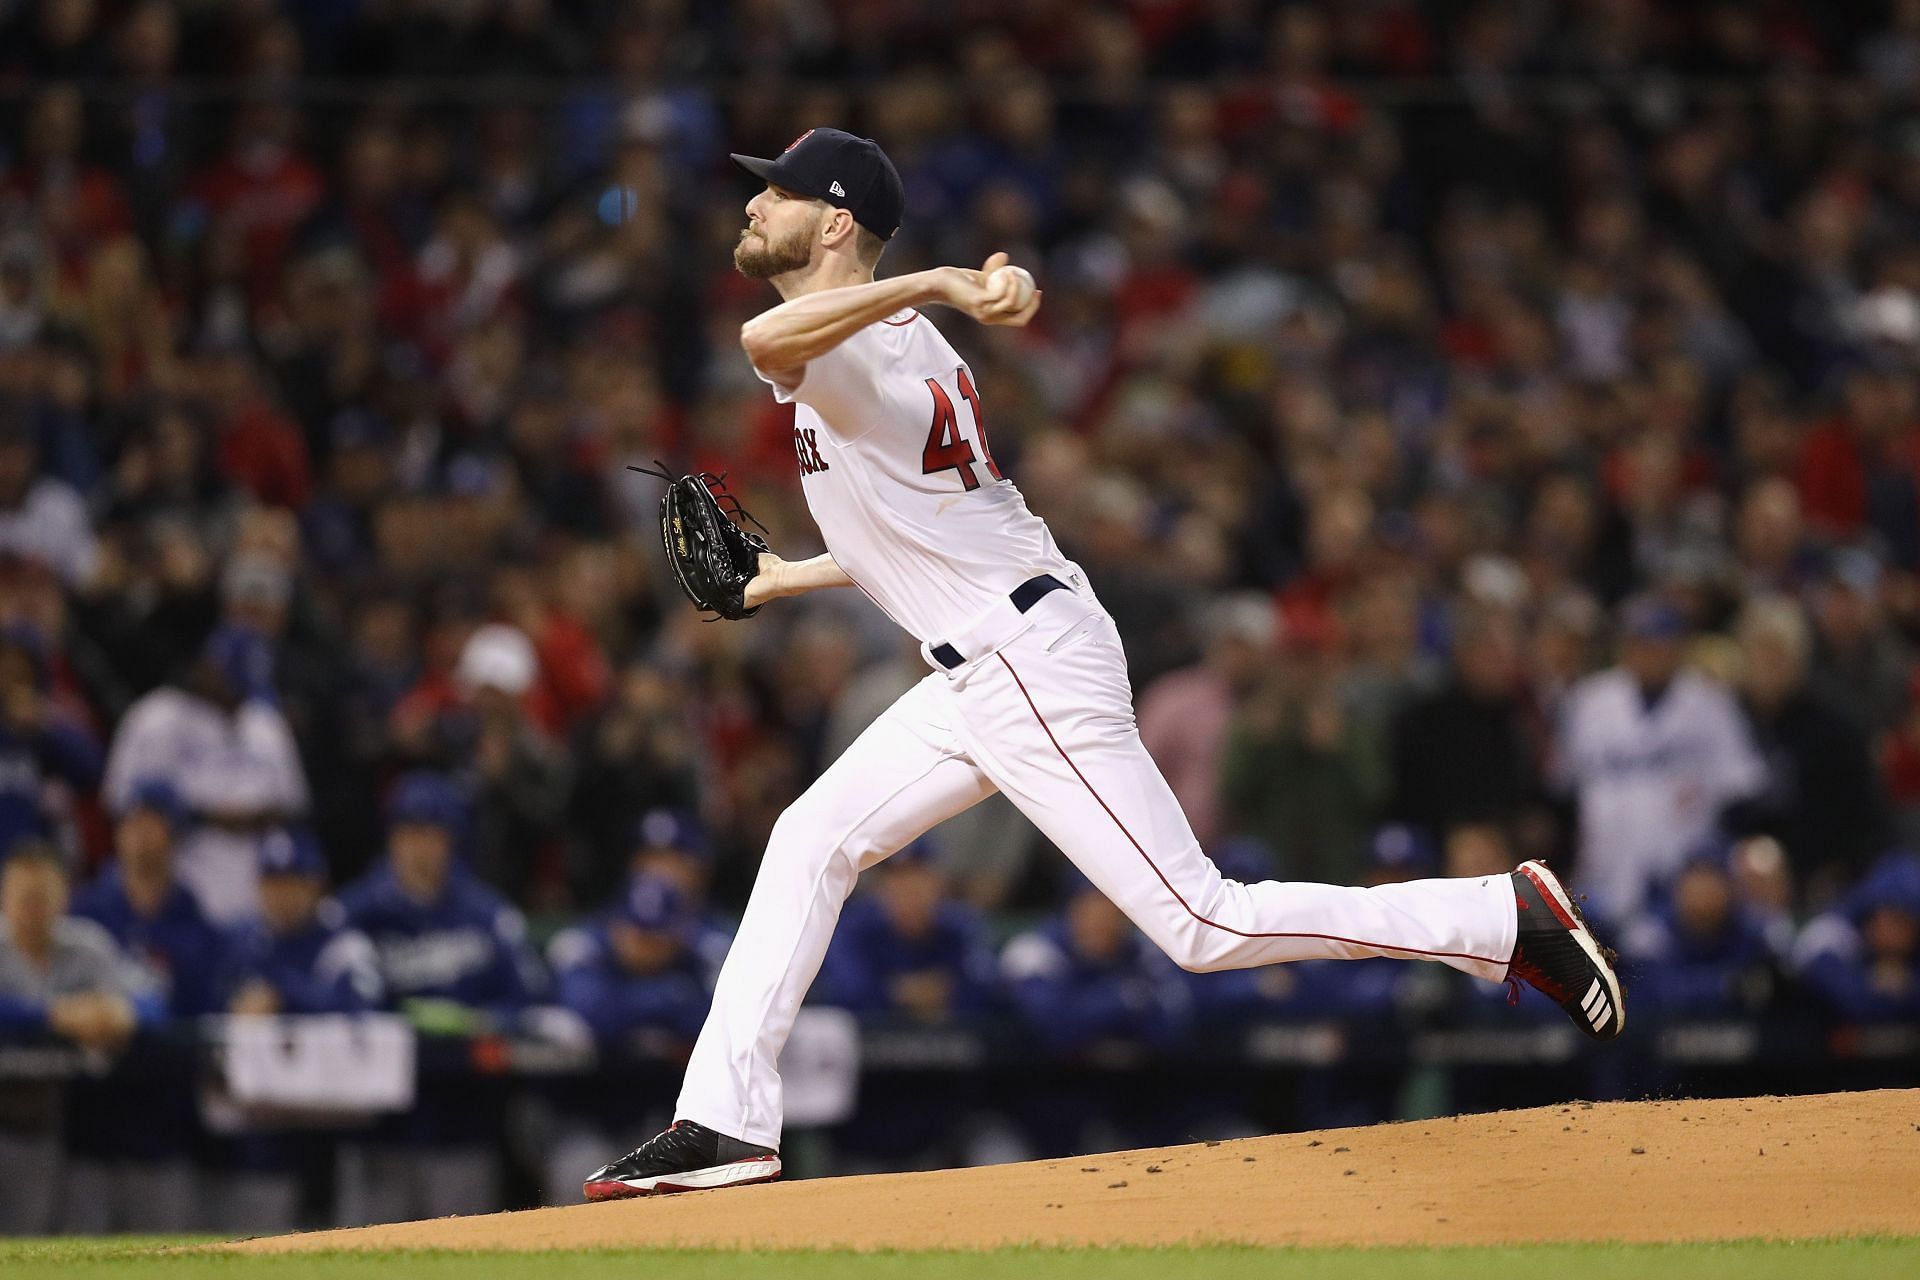 Chris Sale pitching in the World Series against the Los Angeles Dodgers